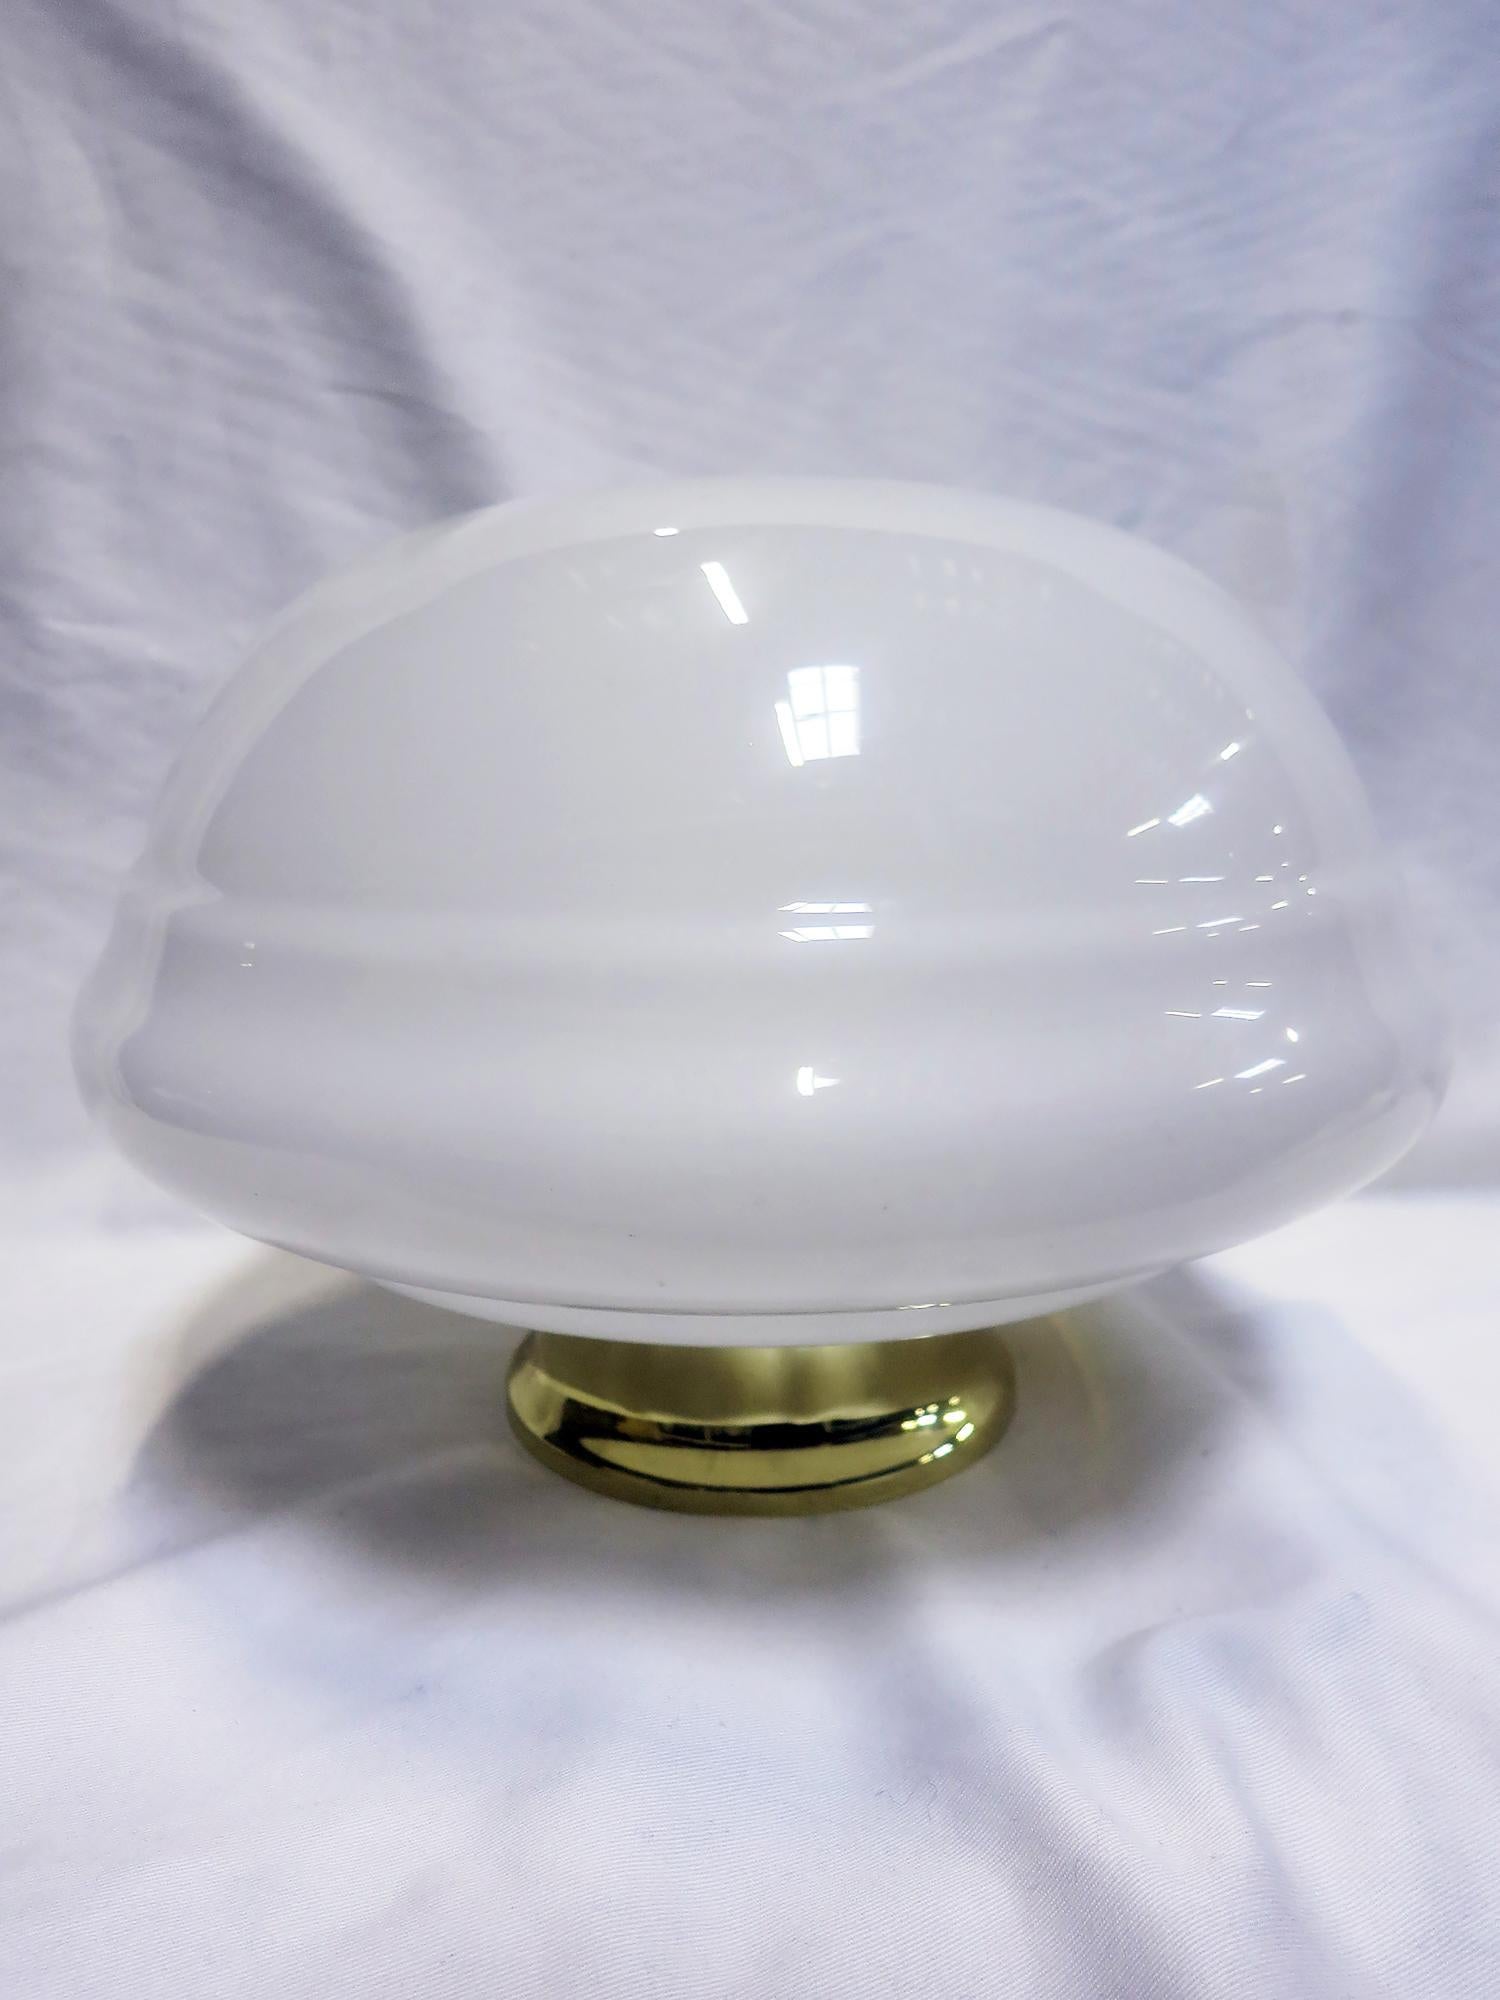 Once used everywhere from classrooms, libraries and courthouses alike, schoolhouse globes offered a practical and utilitarian design with solid, hard-working ambient lighting. Our globe features a banded oval-shape in Classic white milk glass that